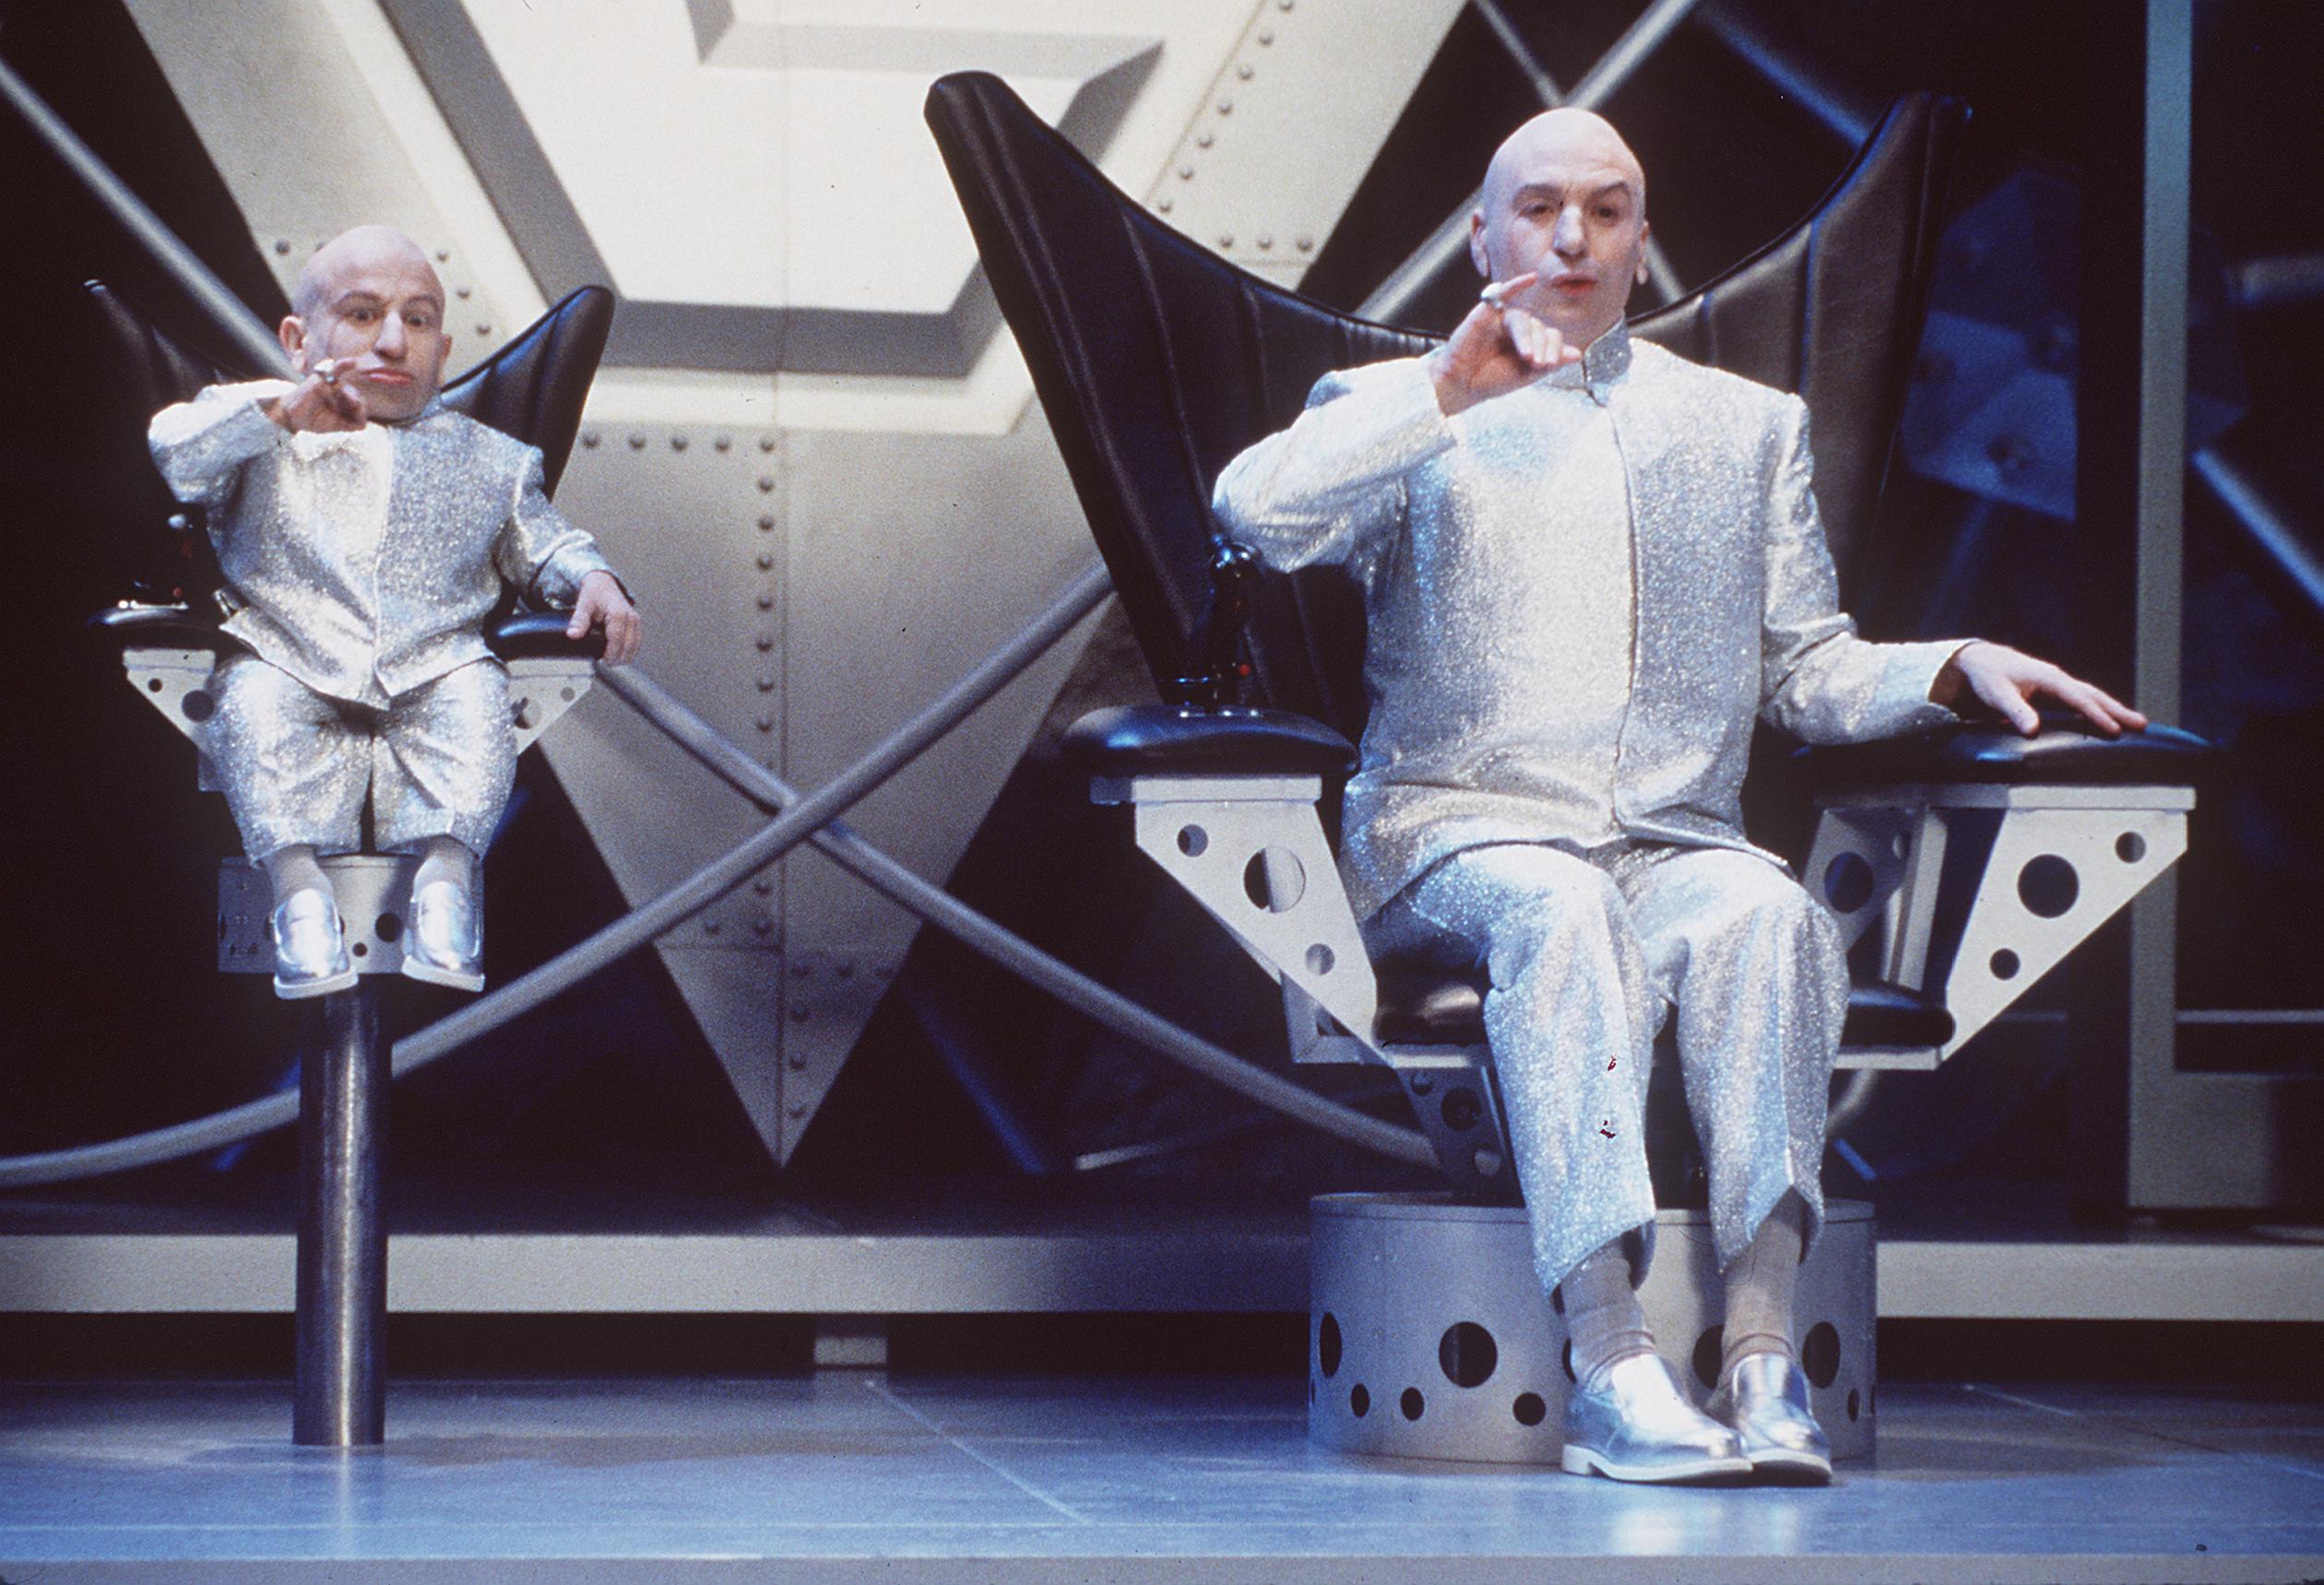 Verne Troyer plays Mini-Me and Mike Myers plays Dr. Evil in Austin Powers: The Spy Who Shagged Me